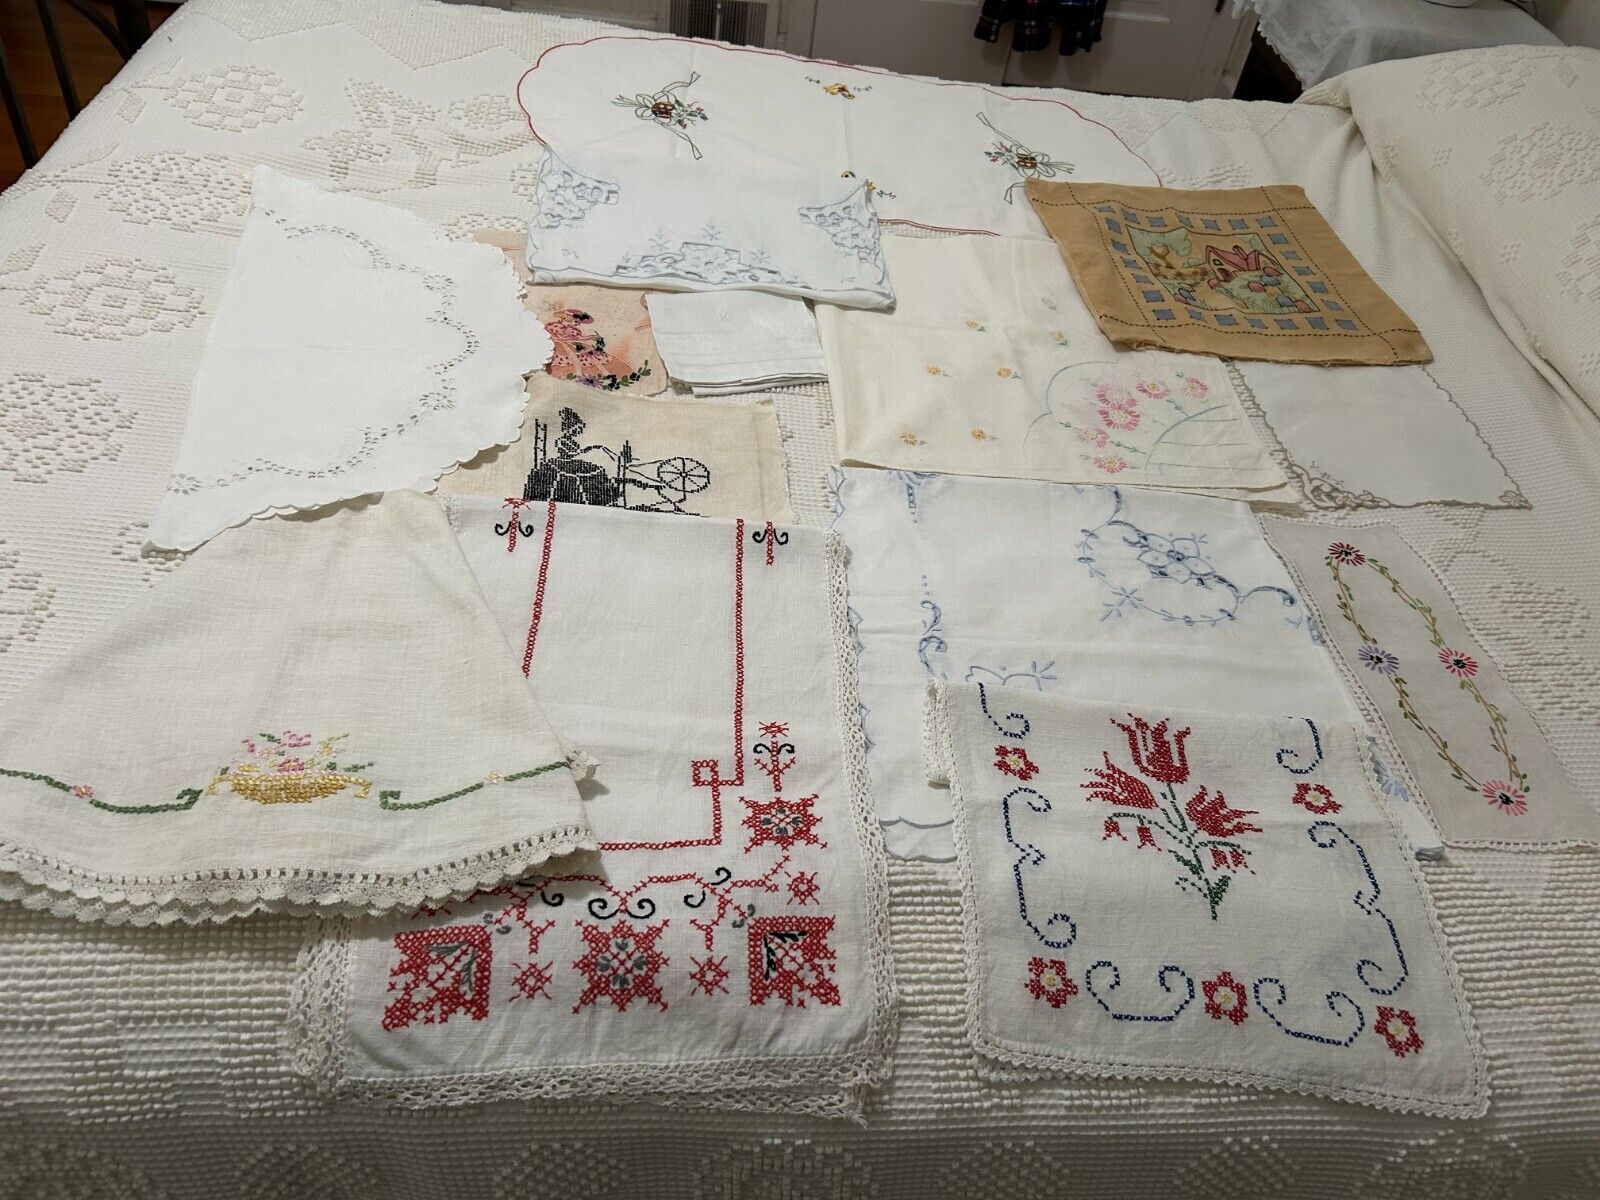 LARGE VINTAGE LINEN LOT EMBROIDERED TABLECLOTHS, RUNNERS, DOILIES, TOWEL